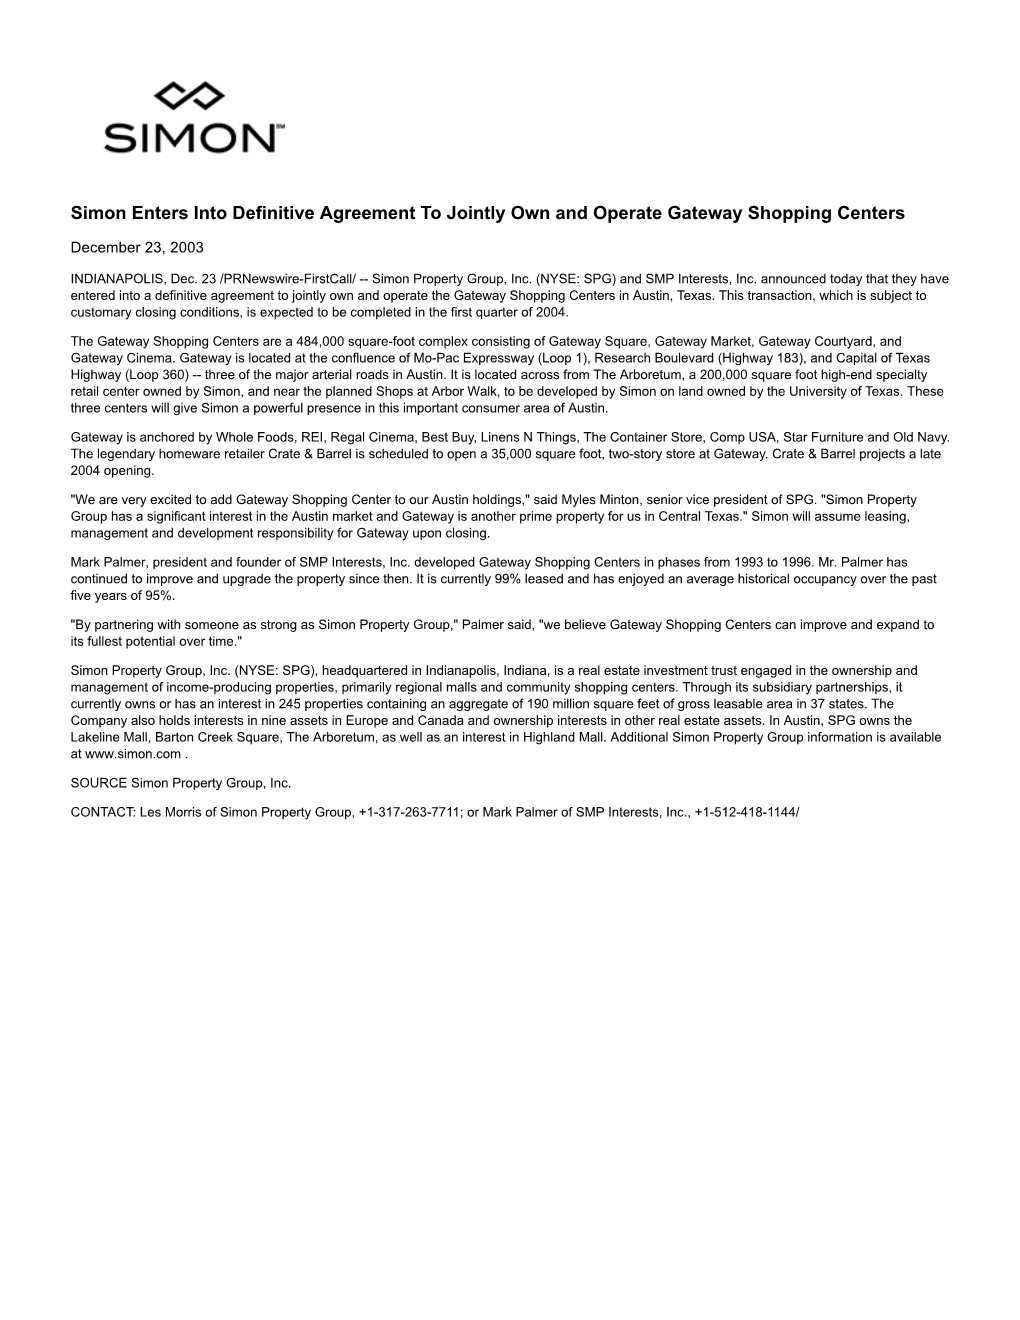 Simon Enters Into Definitive Agreement to Jointly Own and Operate Gateway Shopping Centers